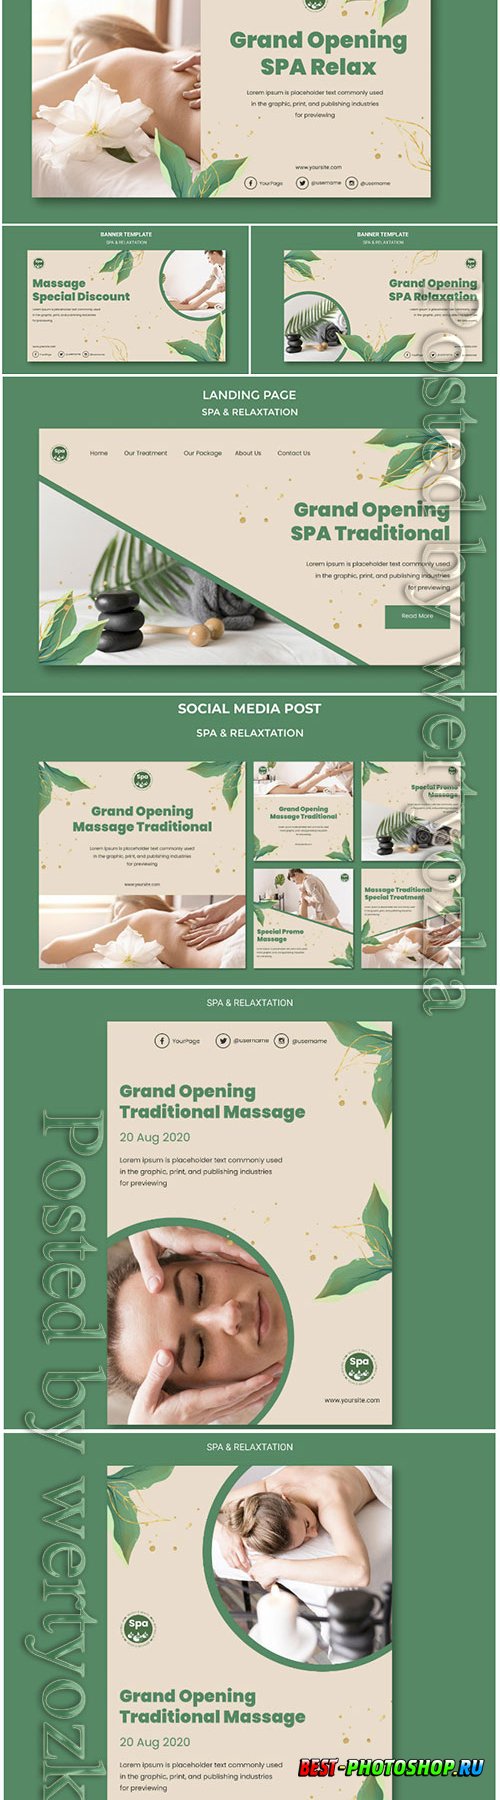 Spa concept banner template